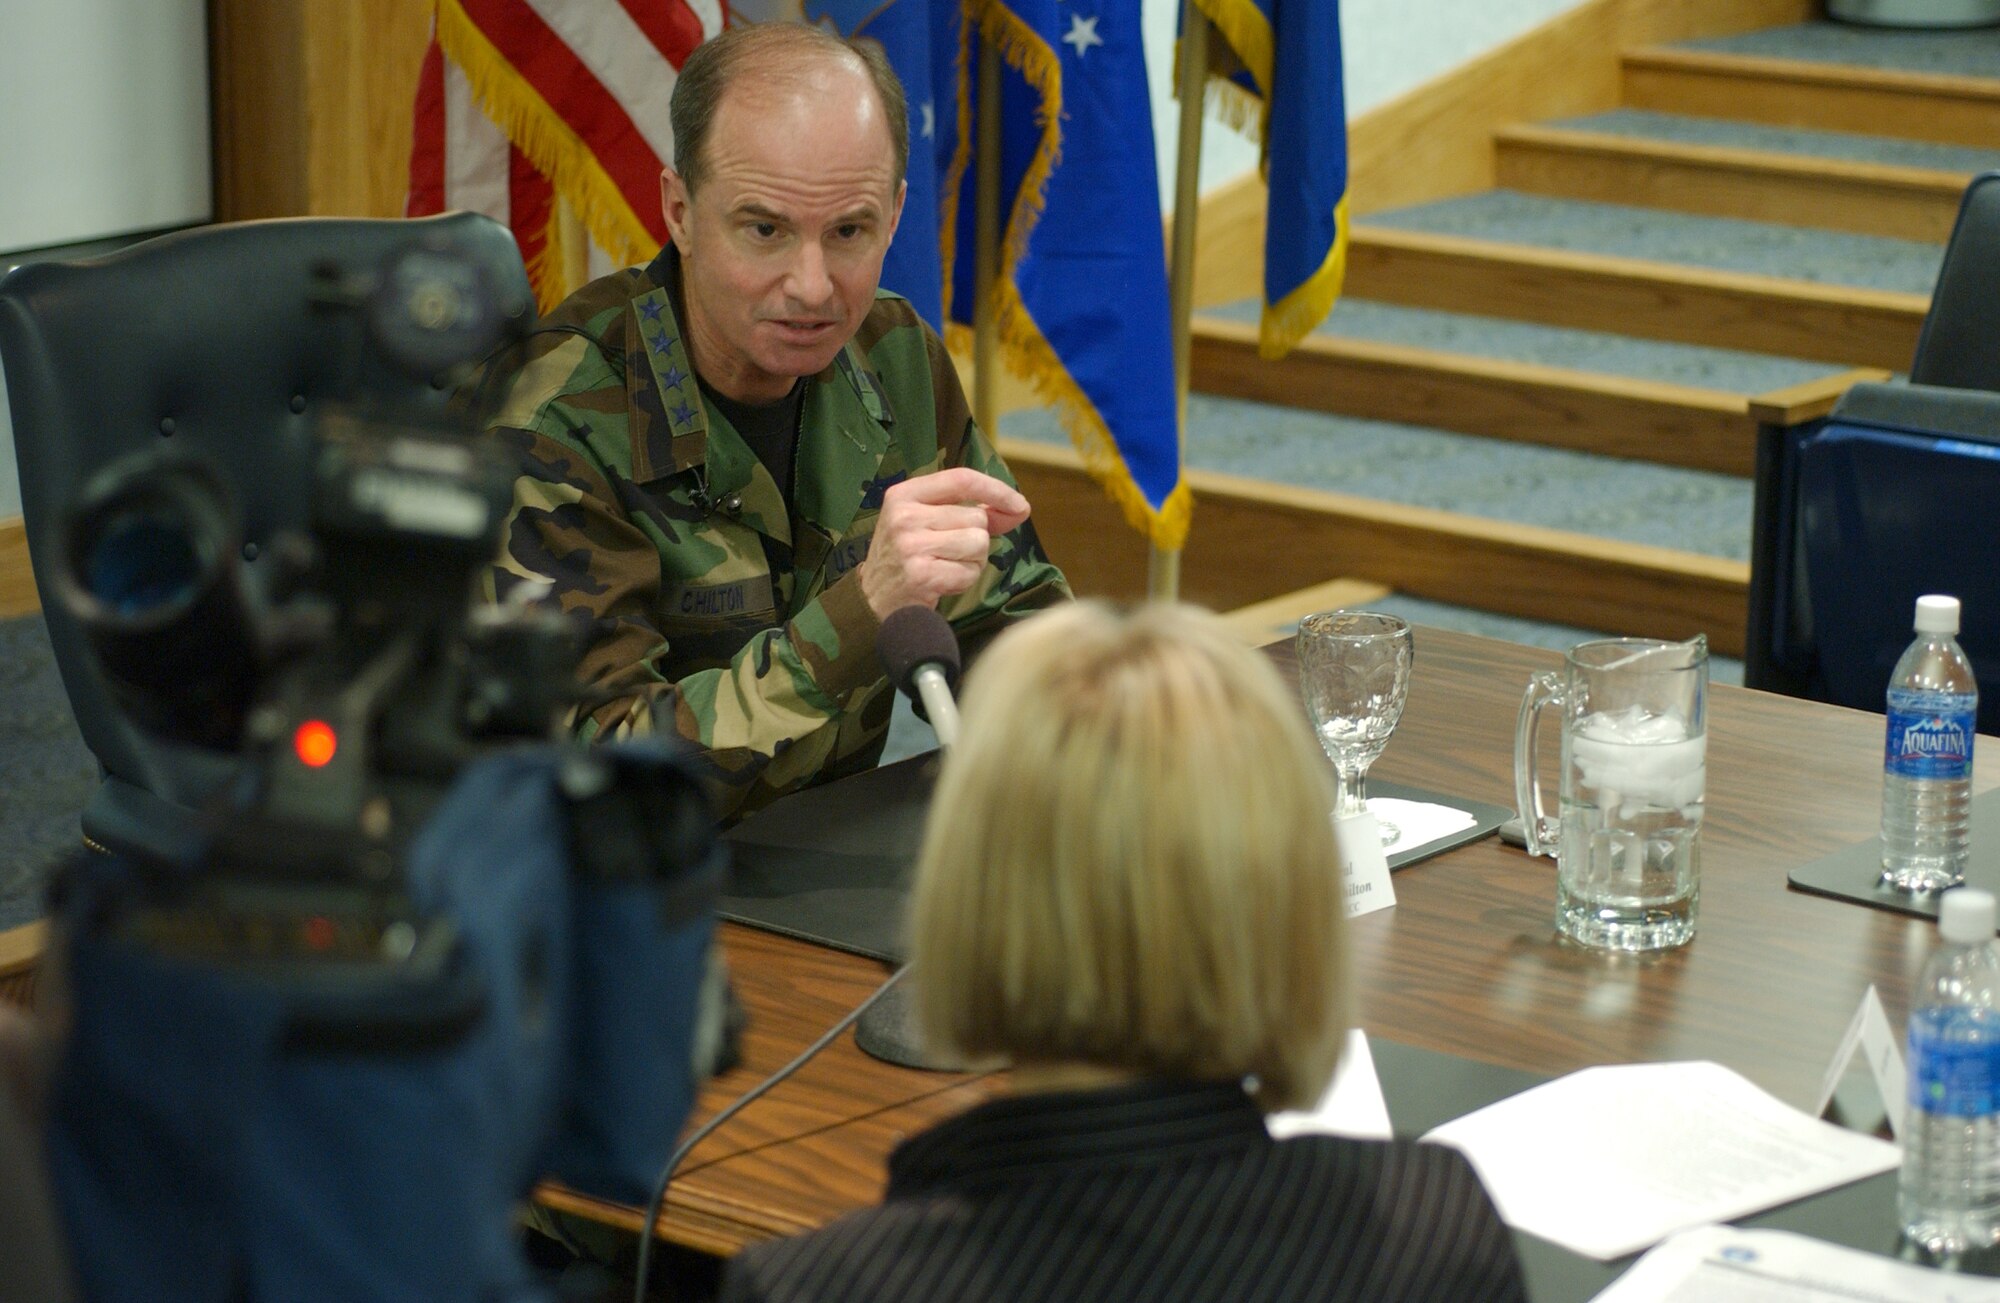 MALMSTROM AIR FORCE BASE, Mont. -- Gen. Kevin P. Chilton, Air Force Space Command commander, talks with local media about his visit to Malmstrom AFB and his vision for the command during a press conference here Jan. 24. (Air Force photo by Roger Day) 